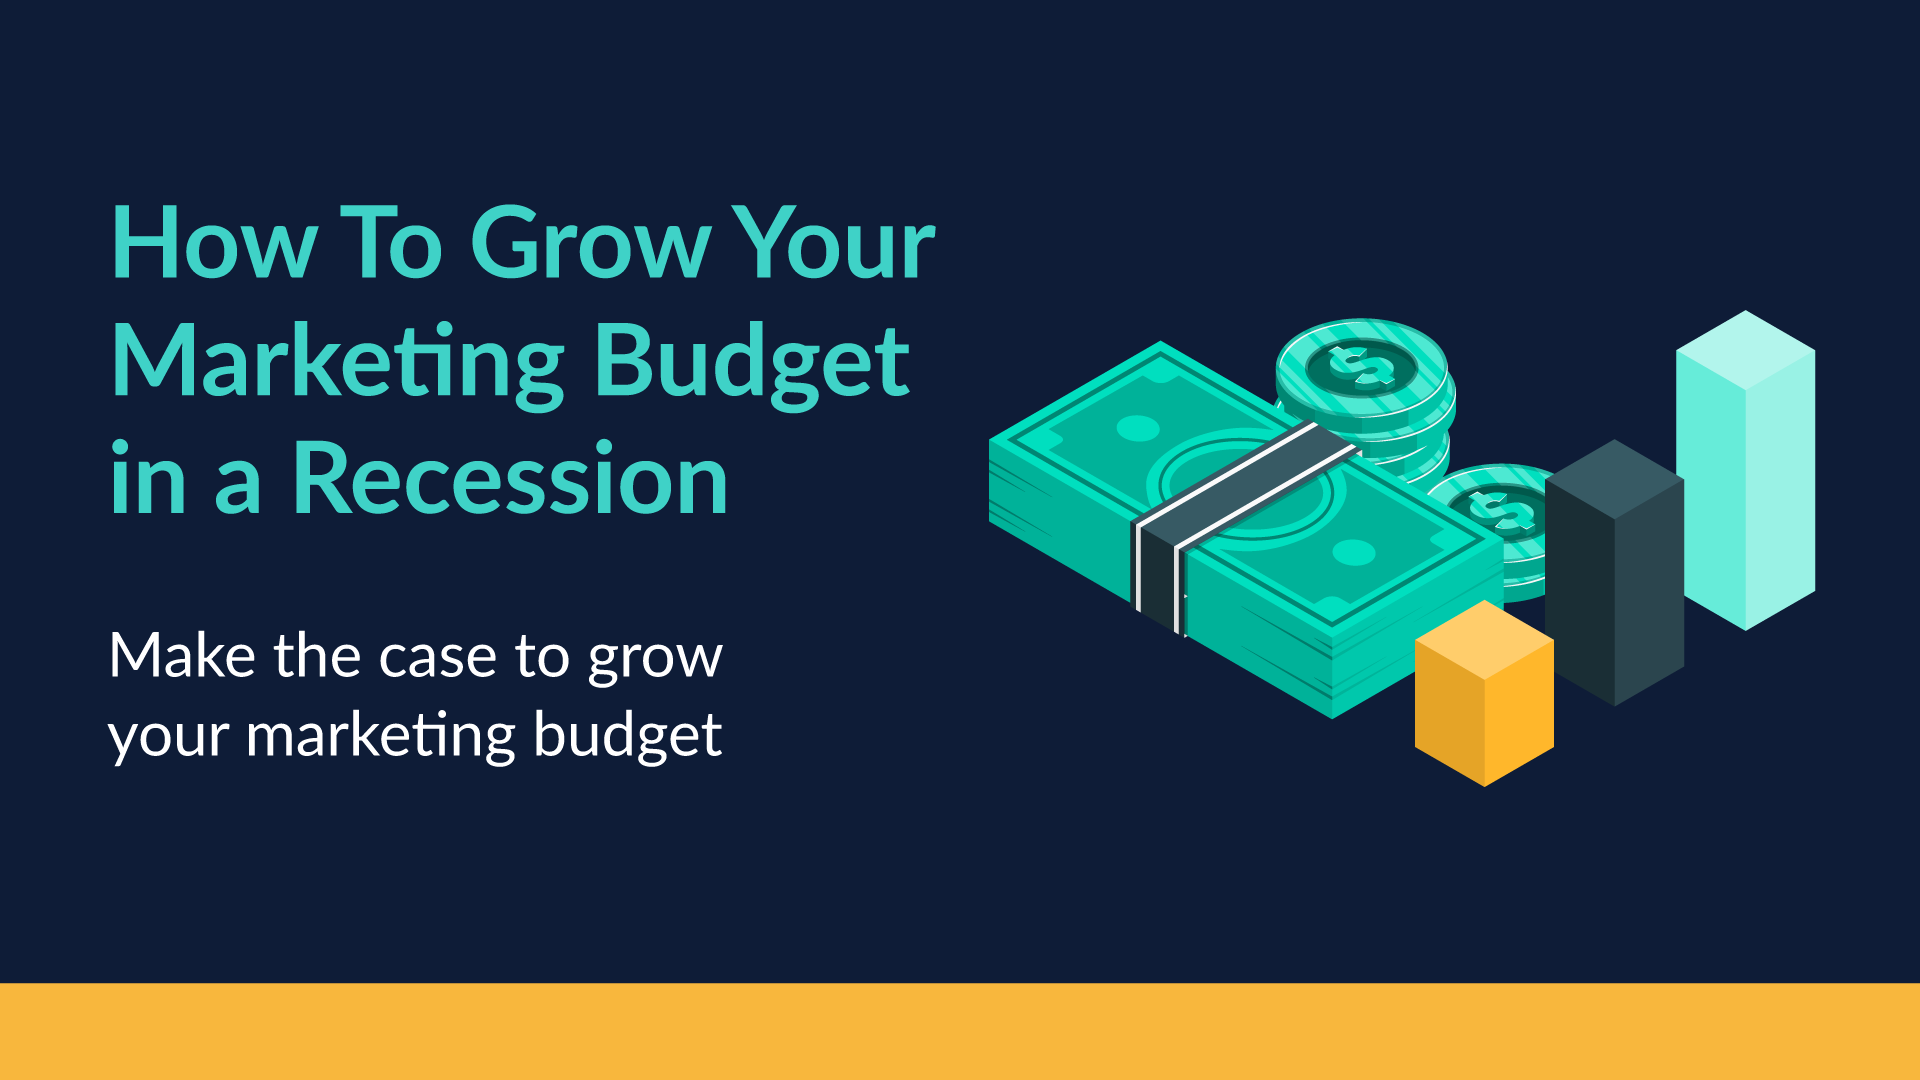 How To Grow Your Marketing Budget in a Recession